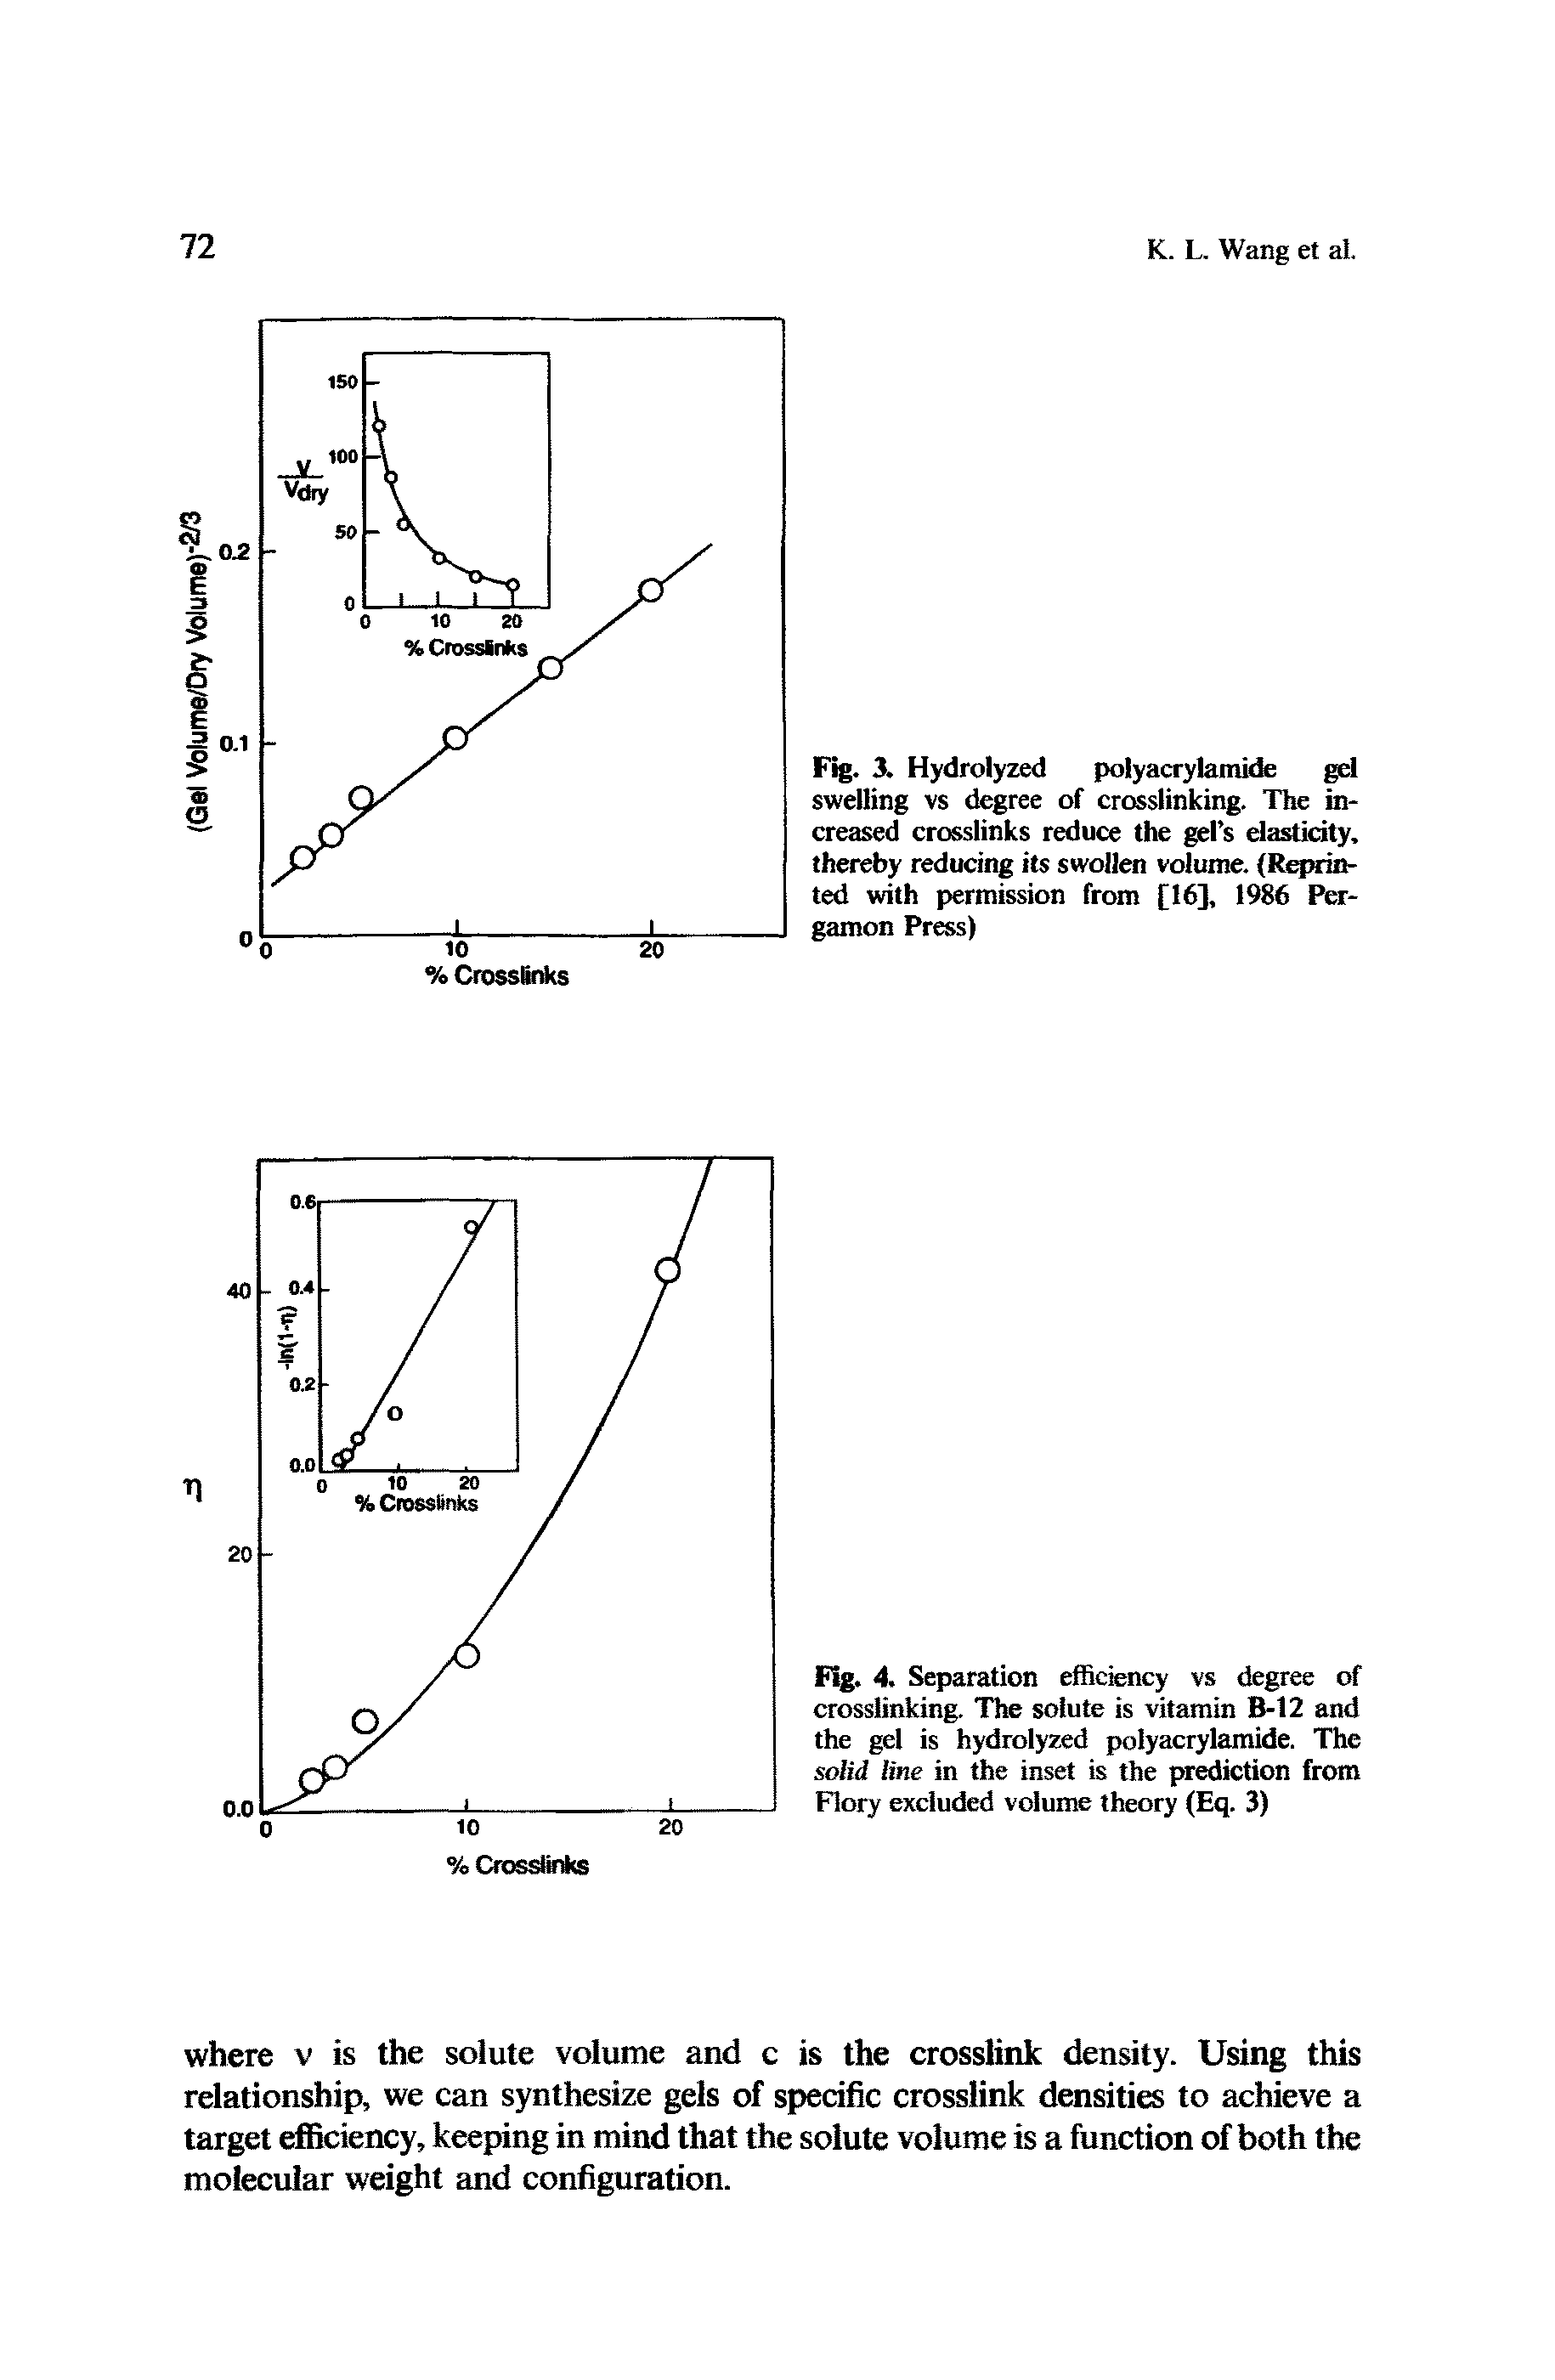 Fig. 4. Separation efficiency vs degree of crosslinking. The solute is vitamin B-12 and the gel is hydrolyzed polyacrylamide. The solid line in the inset is the prediction from Flory excluded volume theory (Eq. 3)...